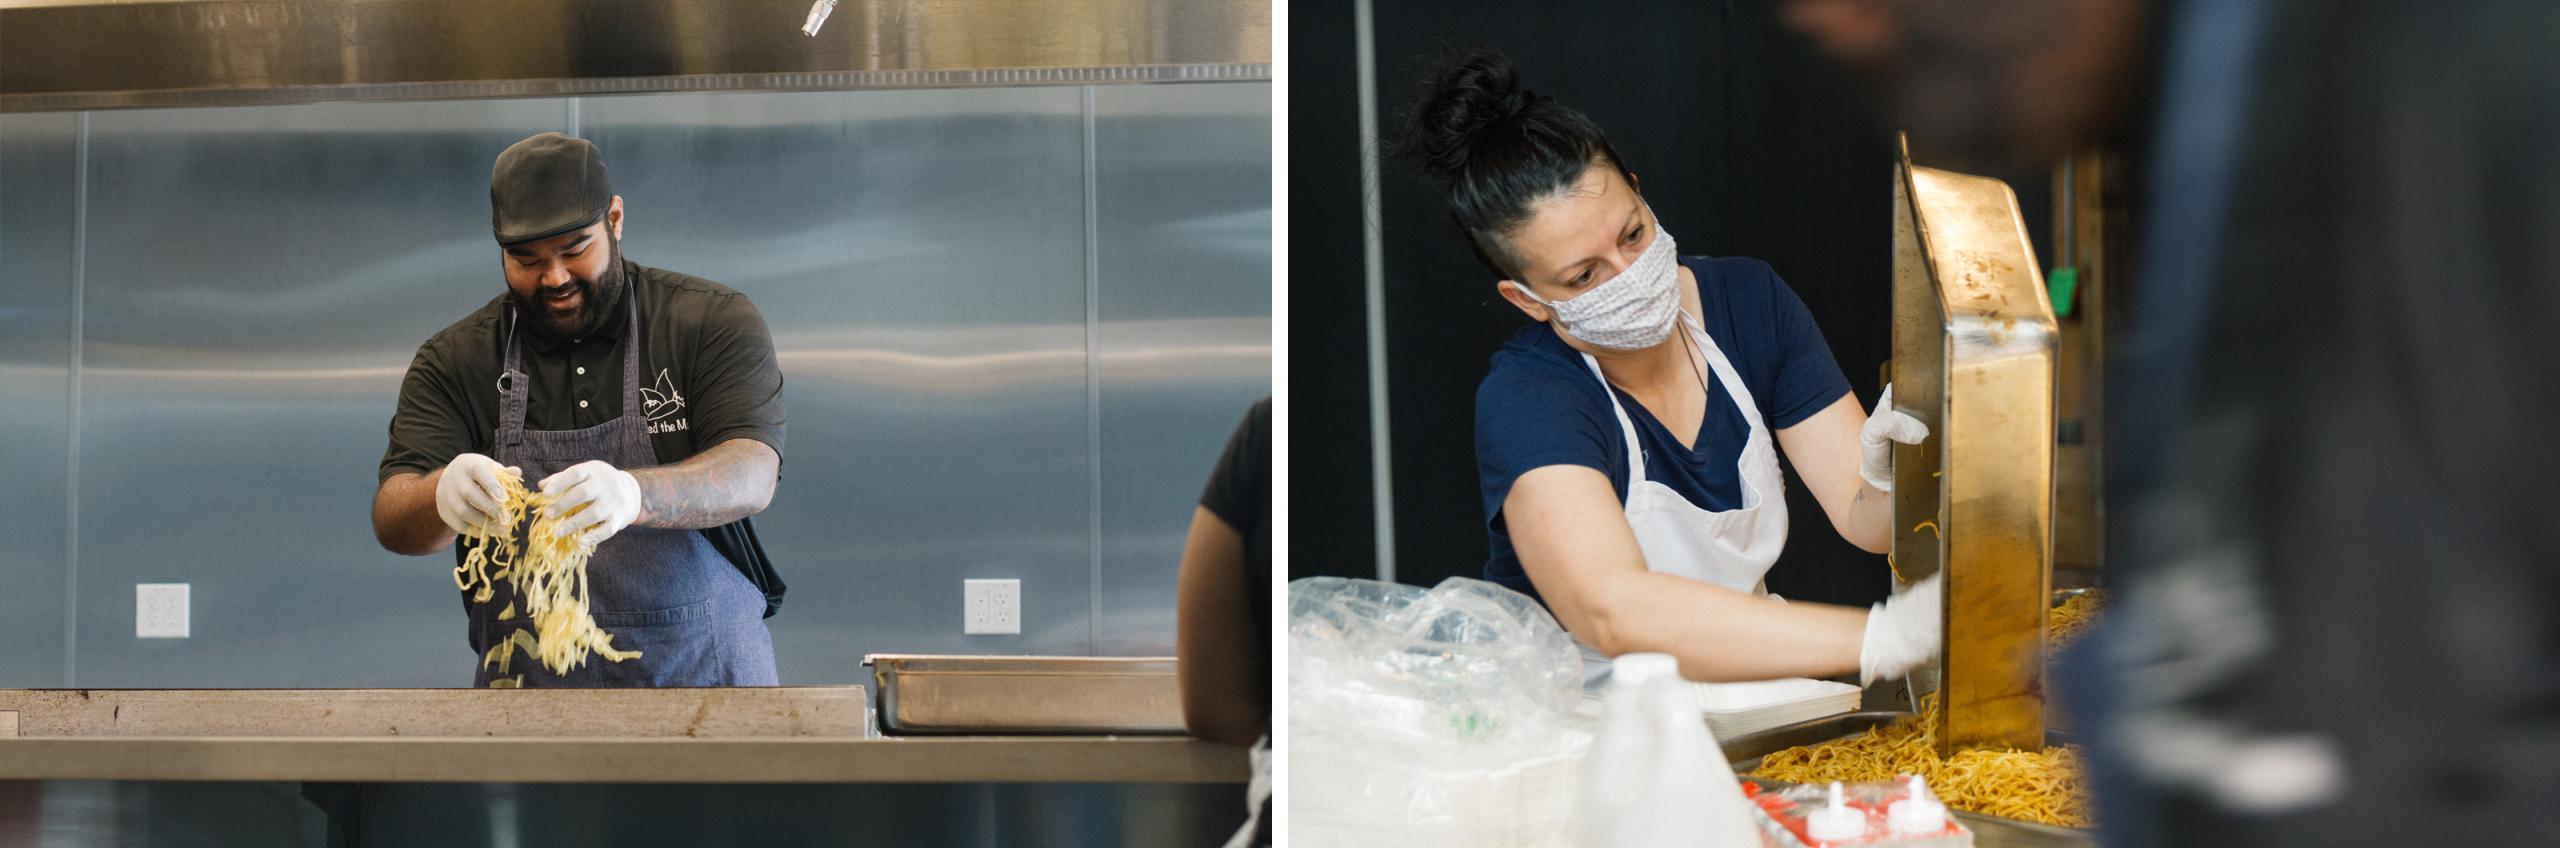 An image of two photos: The left photo shows a man placing noodles on a grill; the right photo shows a woman transferring noodles from a stainless steel tray.